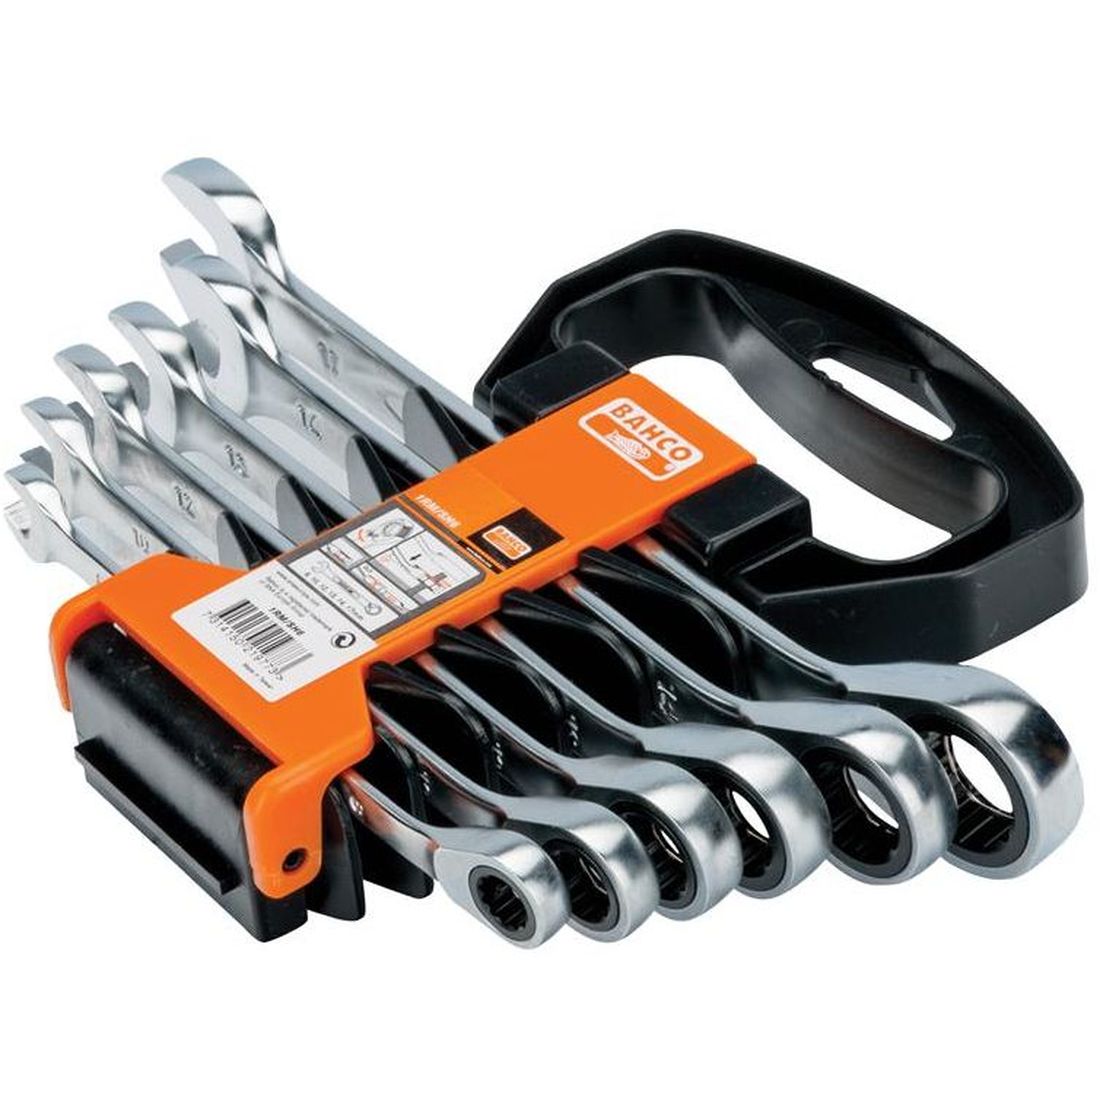 Bahco 1RM Ratcheting Combination Wrench Set, 6 Piece                                  